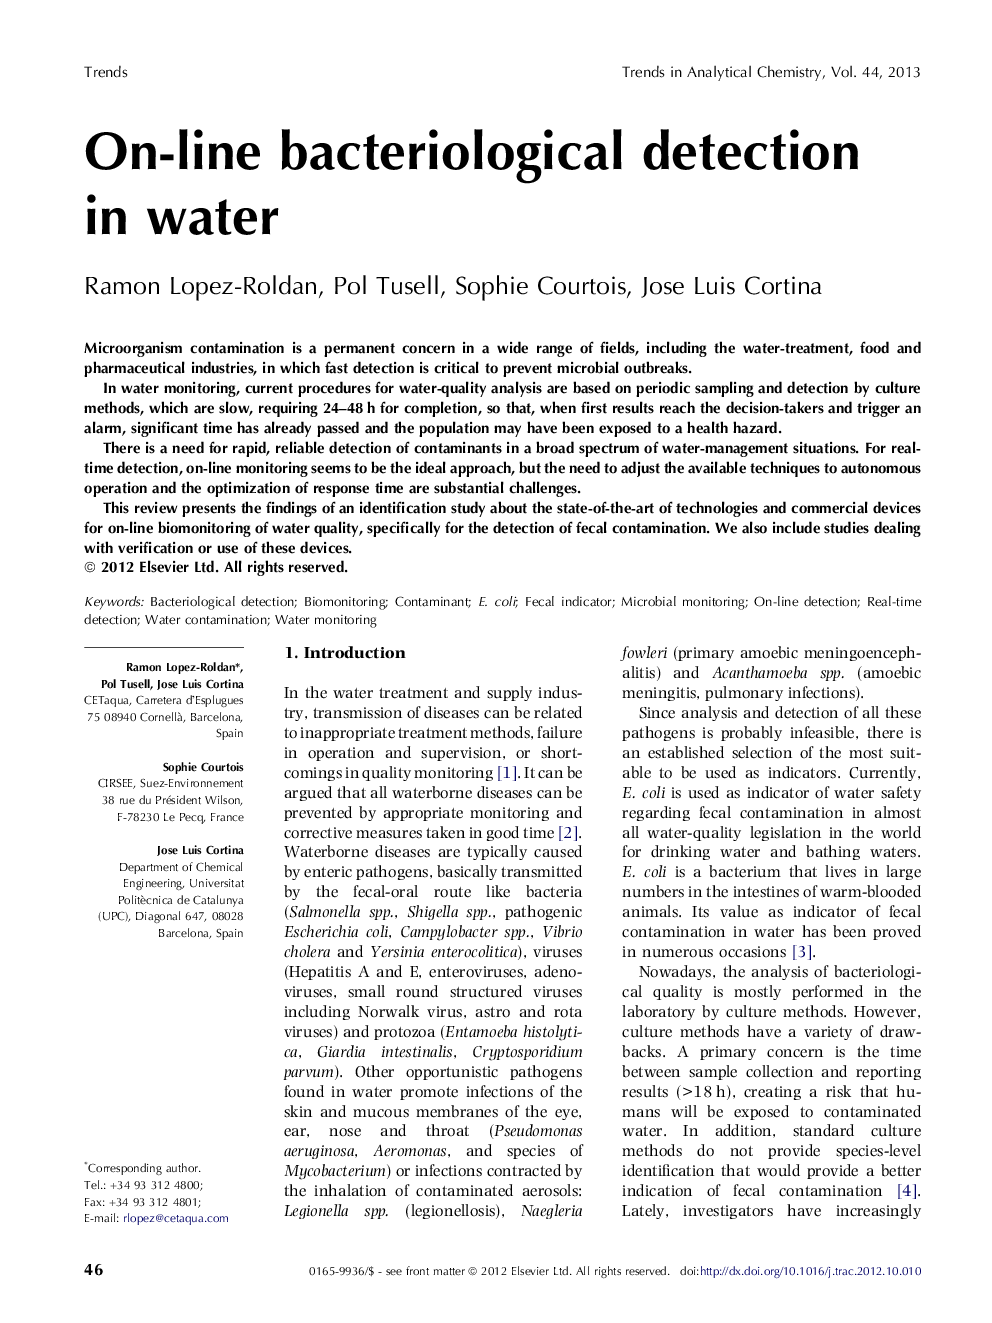 On-line bacteriological detection in water